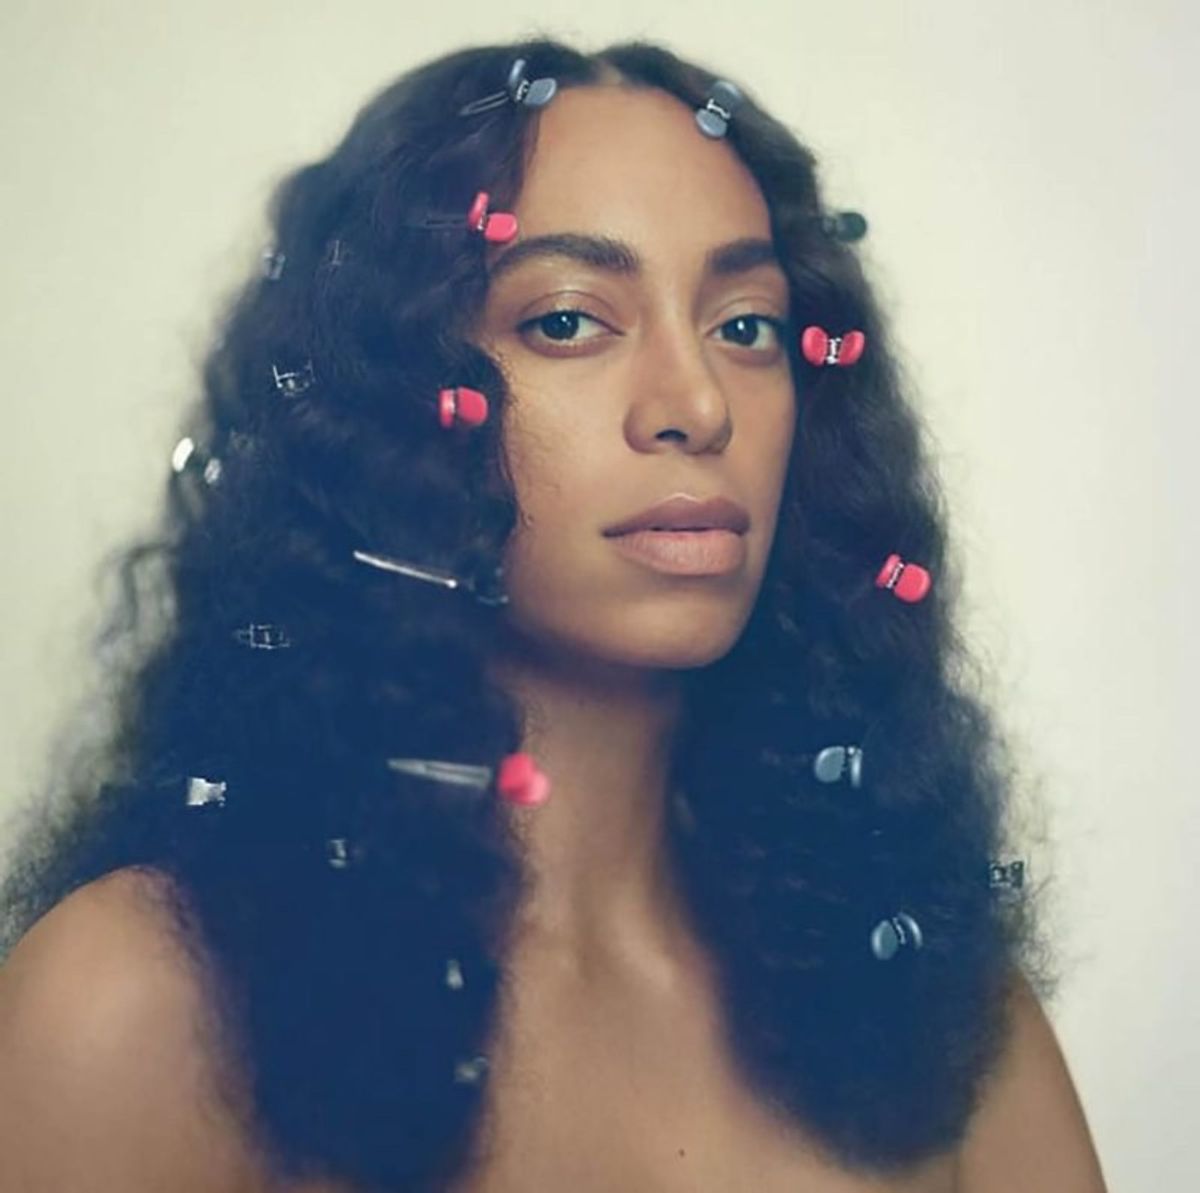 Why You Need To Listen To Solange's Album "A Seat At The Table"!